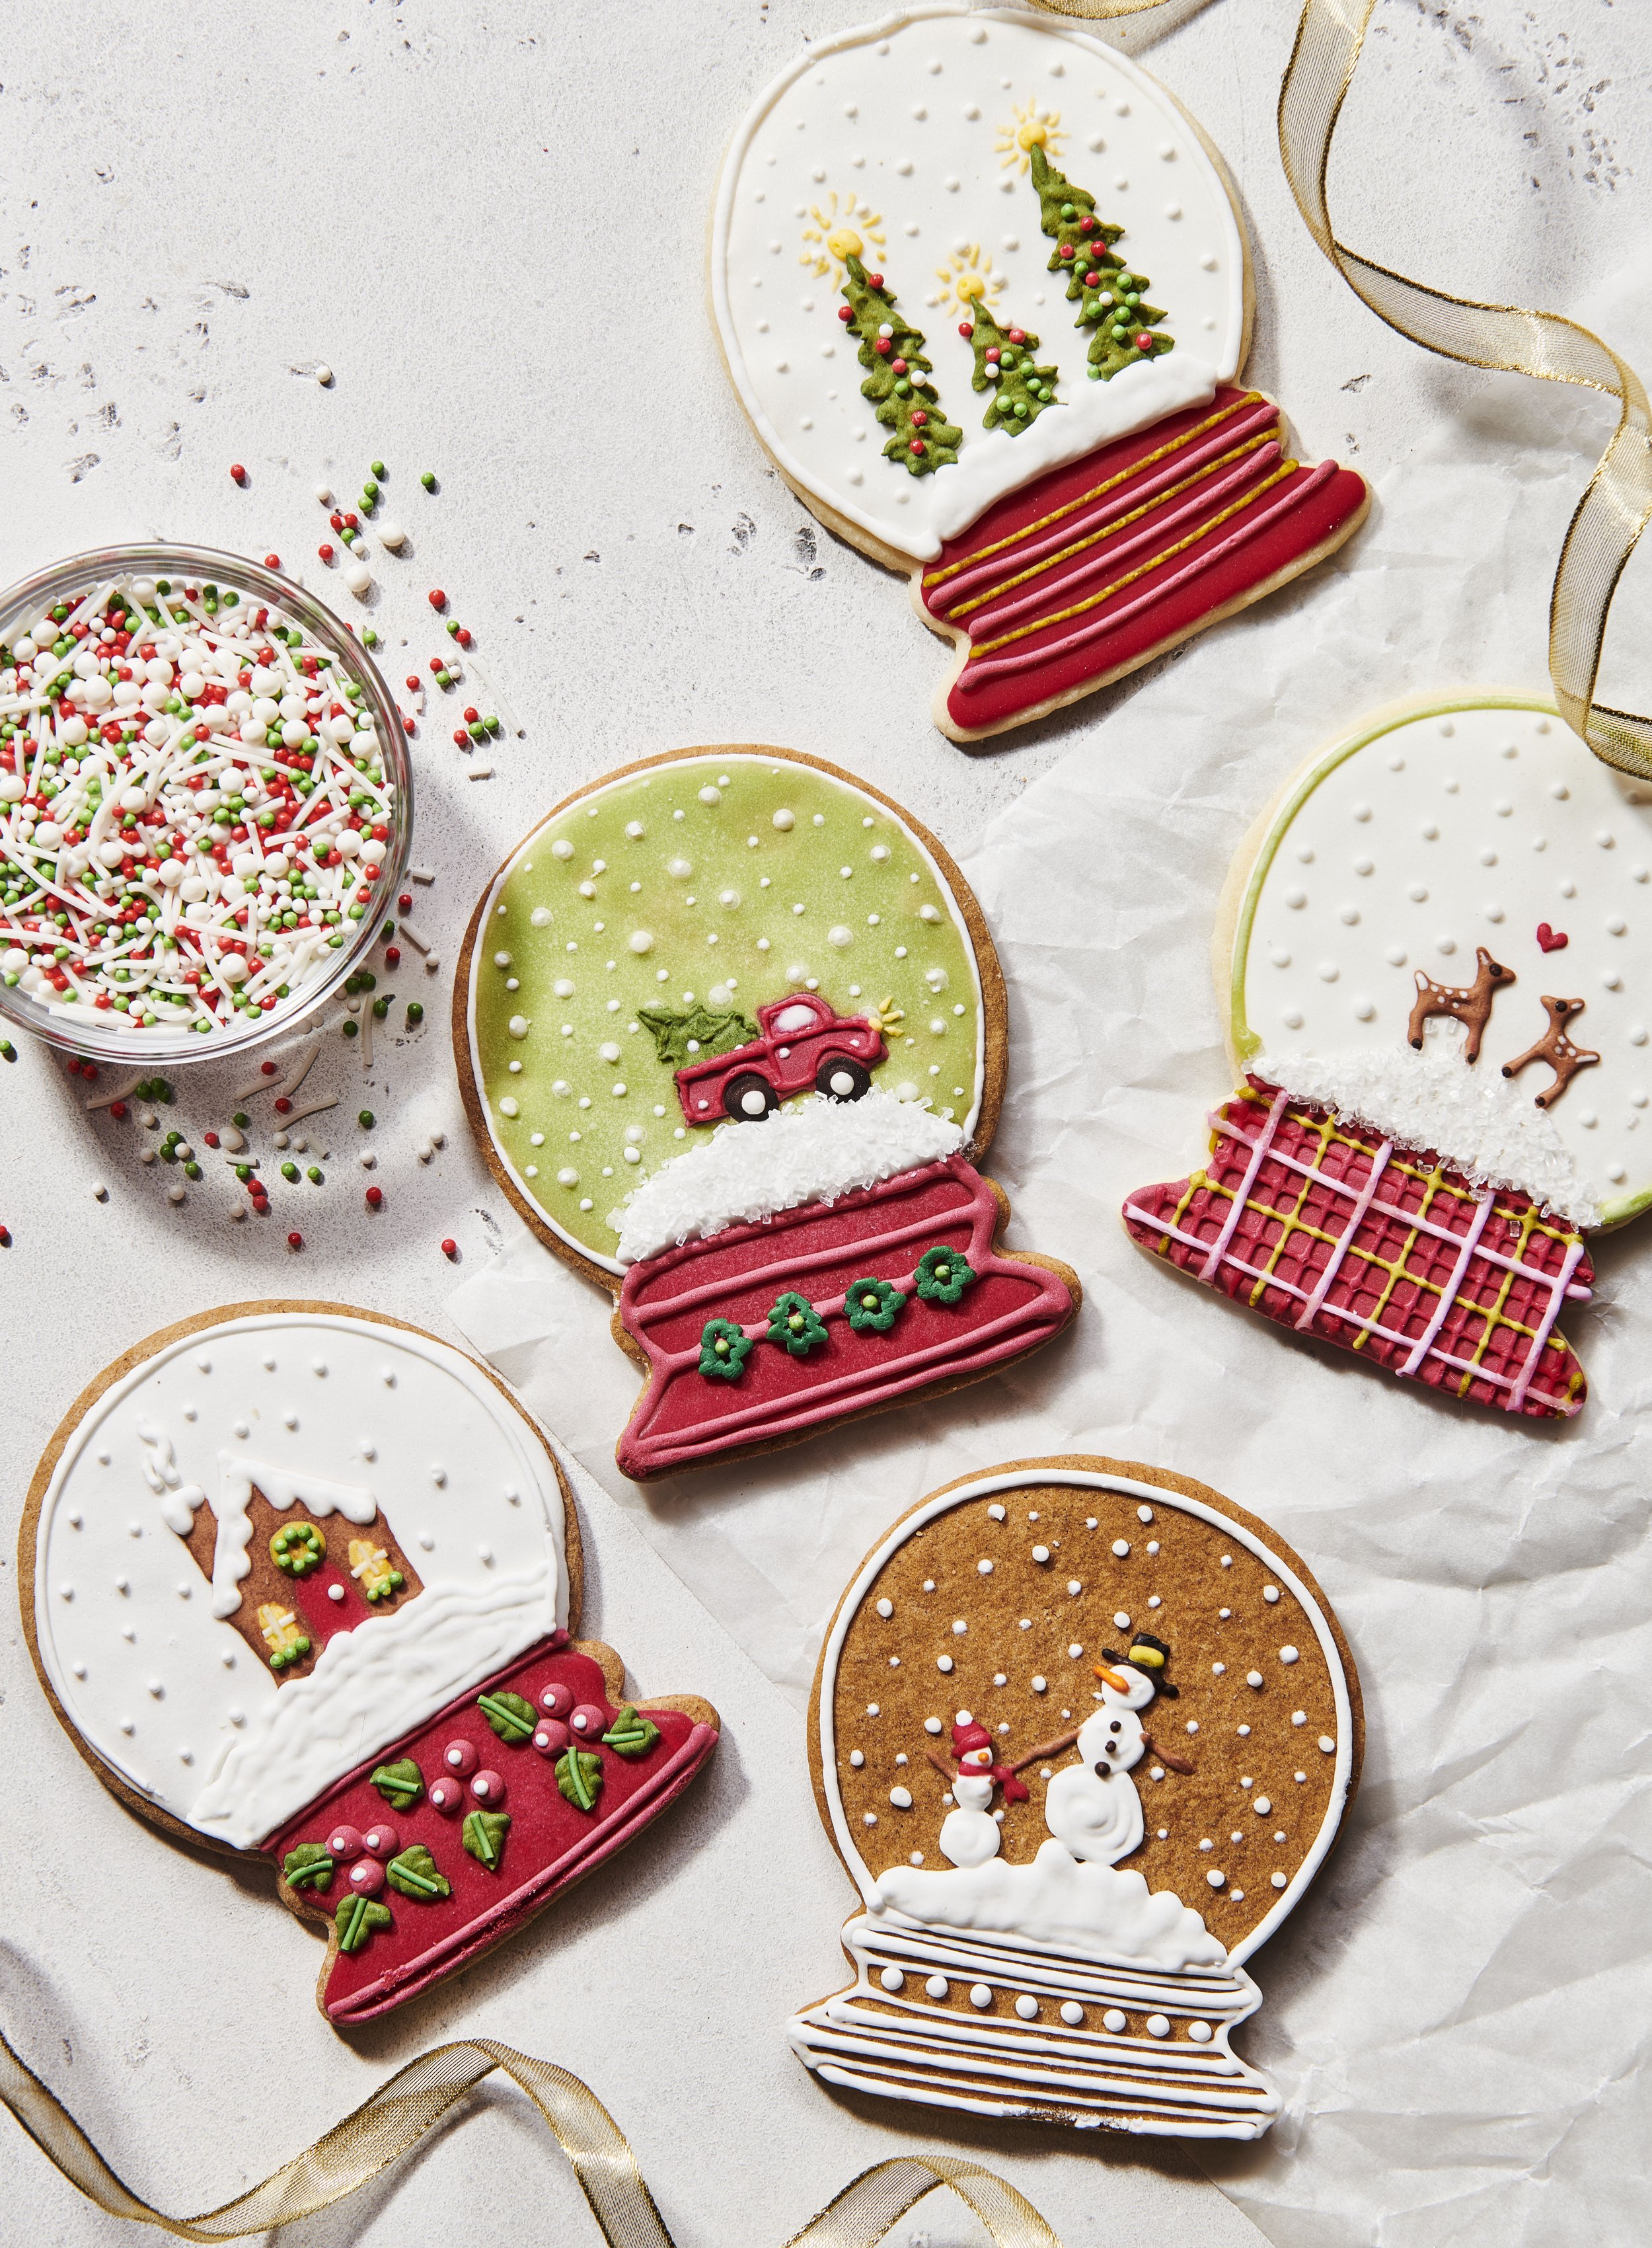 Decorated-Cookies-Cover-7201 copy.jpg